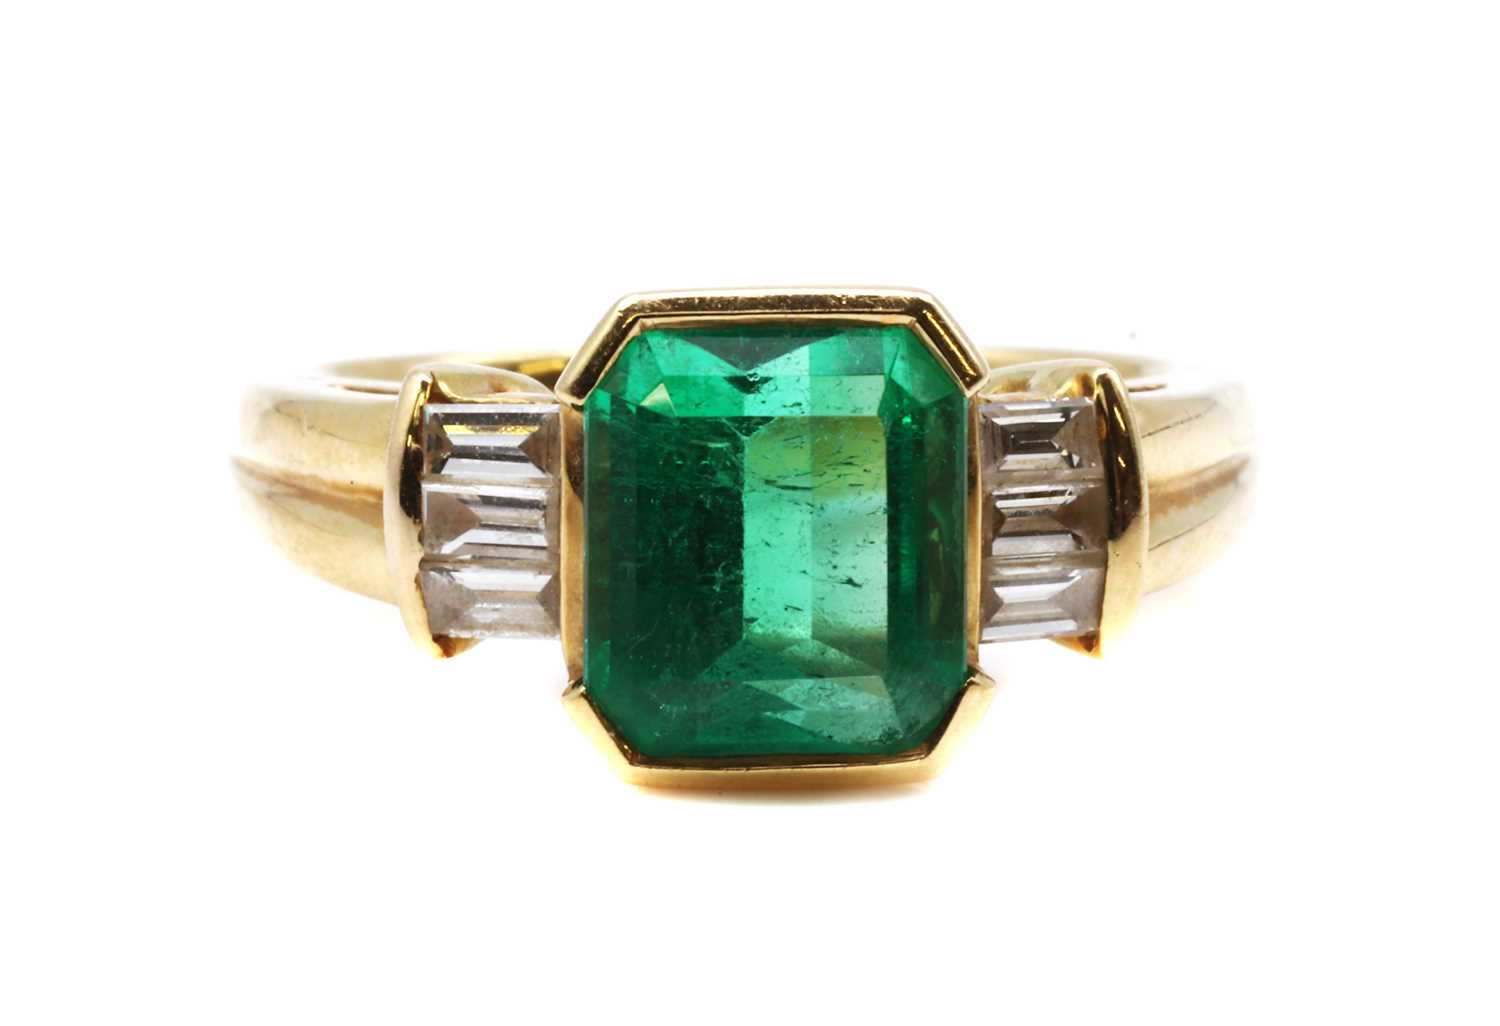 Lot 471 - A single stone emerald ring with diamond set shoulders, by Colombian Emeralds International, c.2005